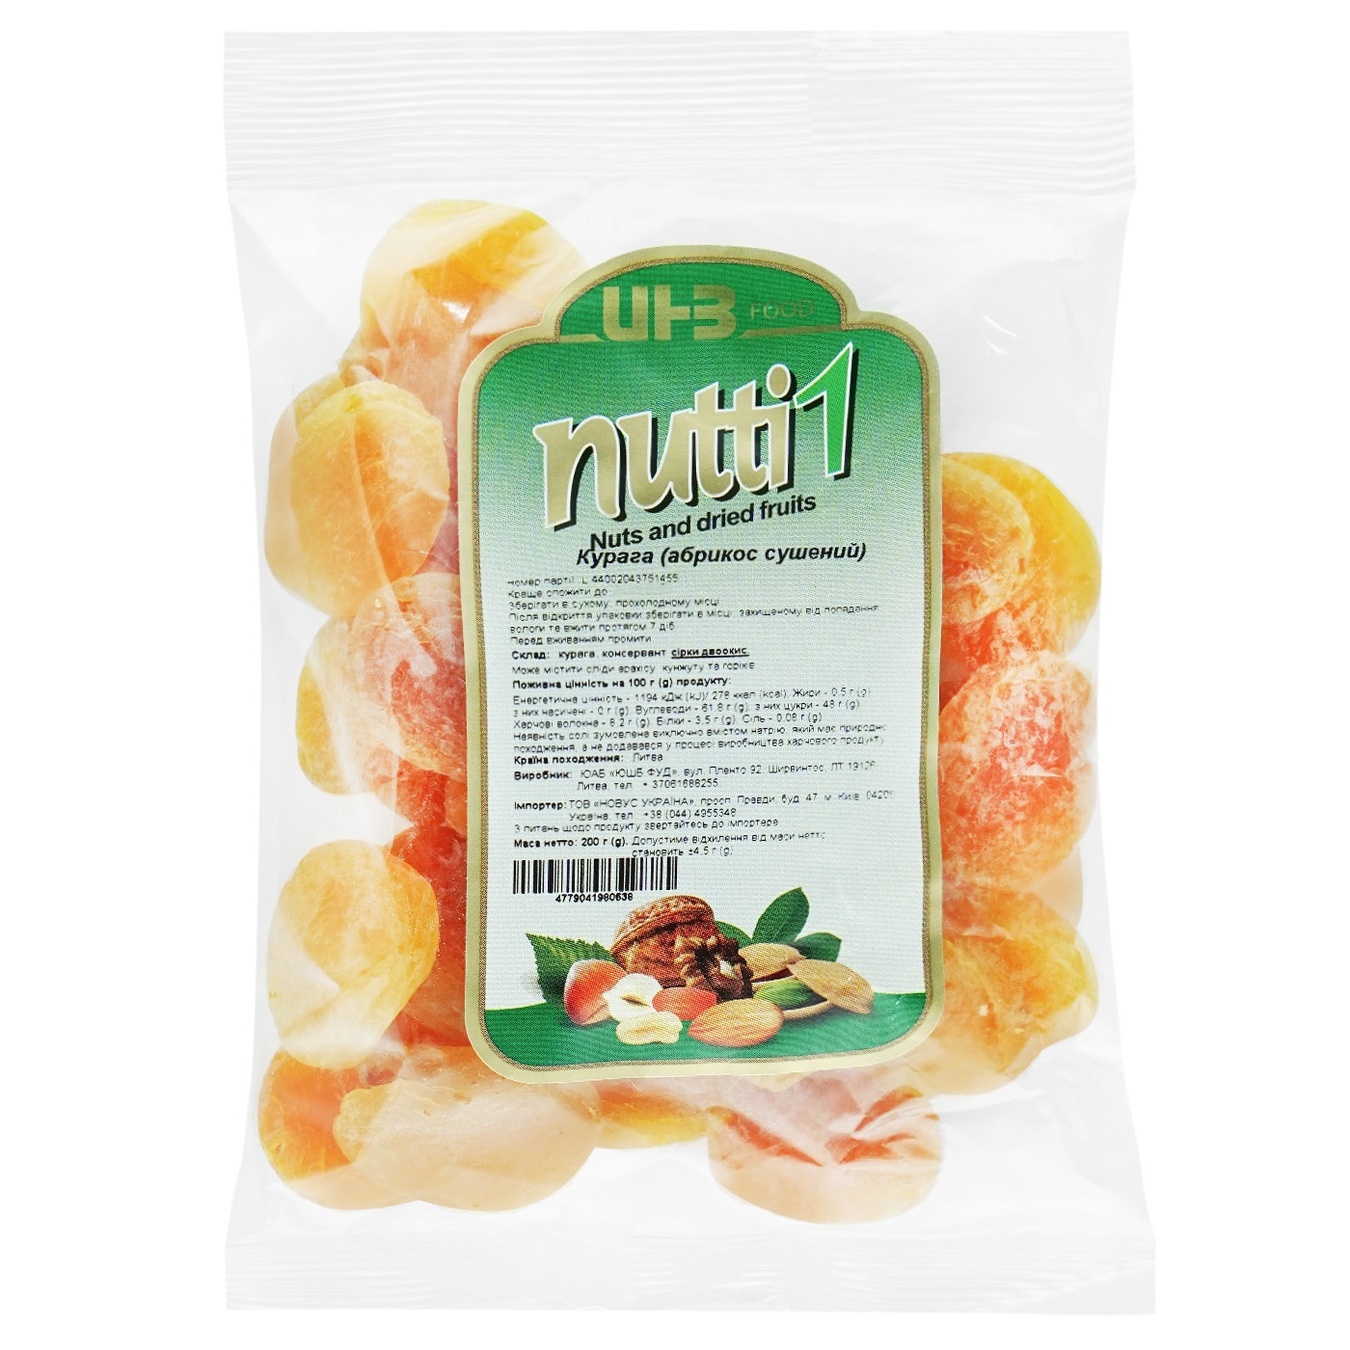 Nutti dried apricots 200g